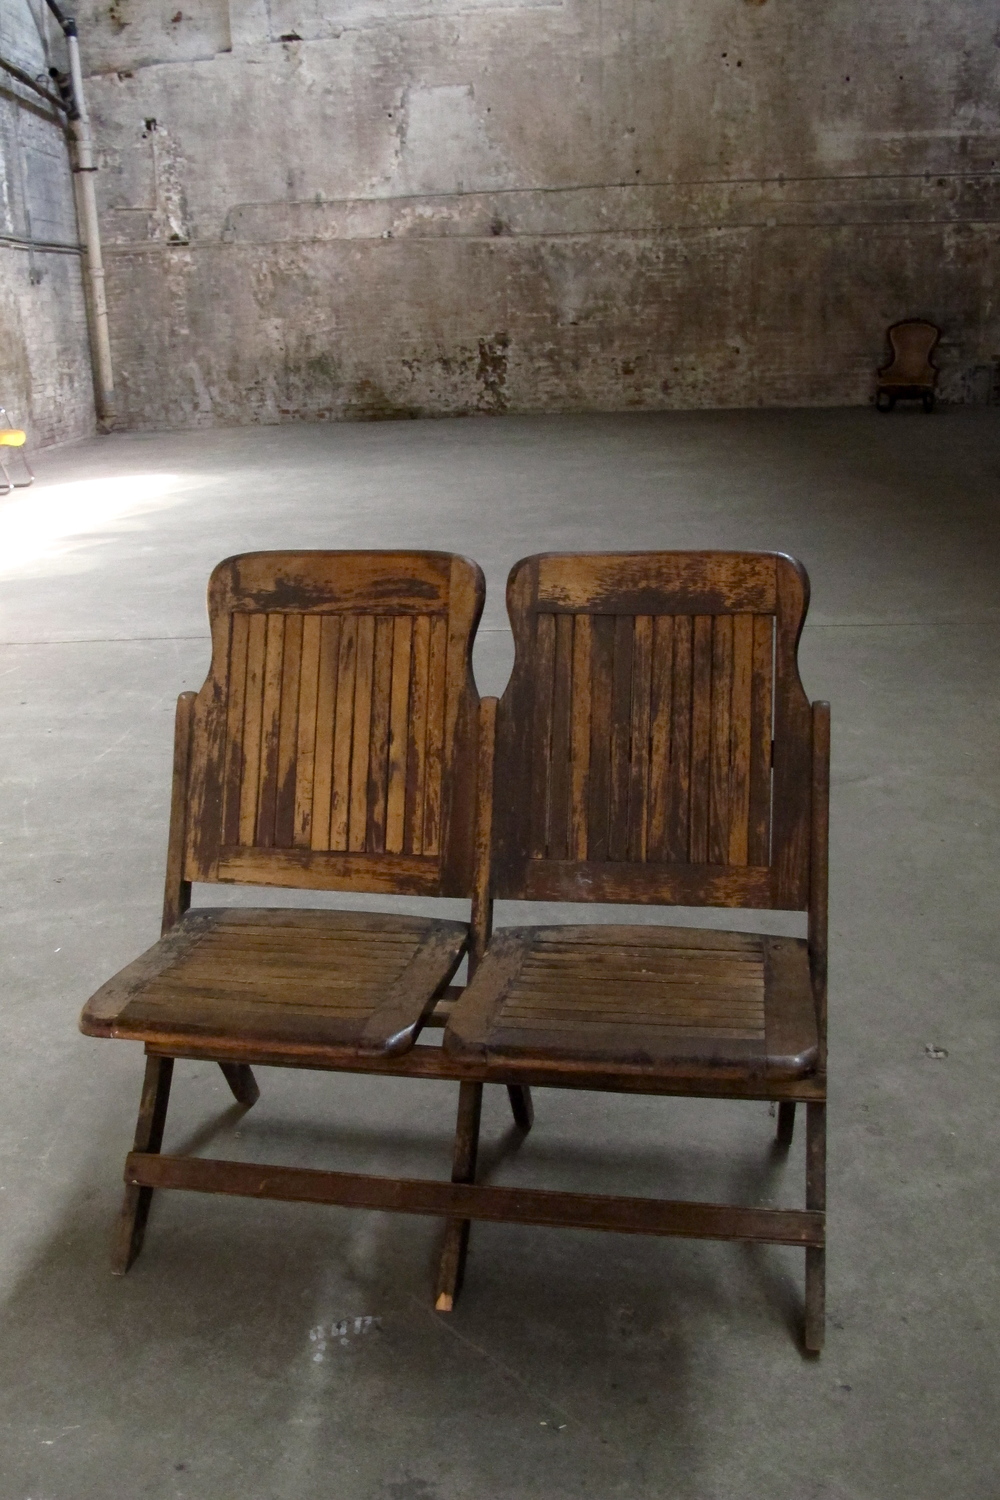 Wood Seating Primate Props, Wooden Theater Seats